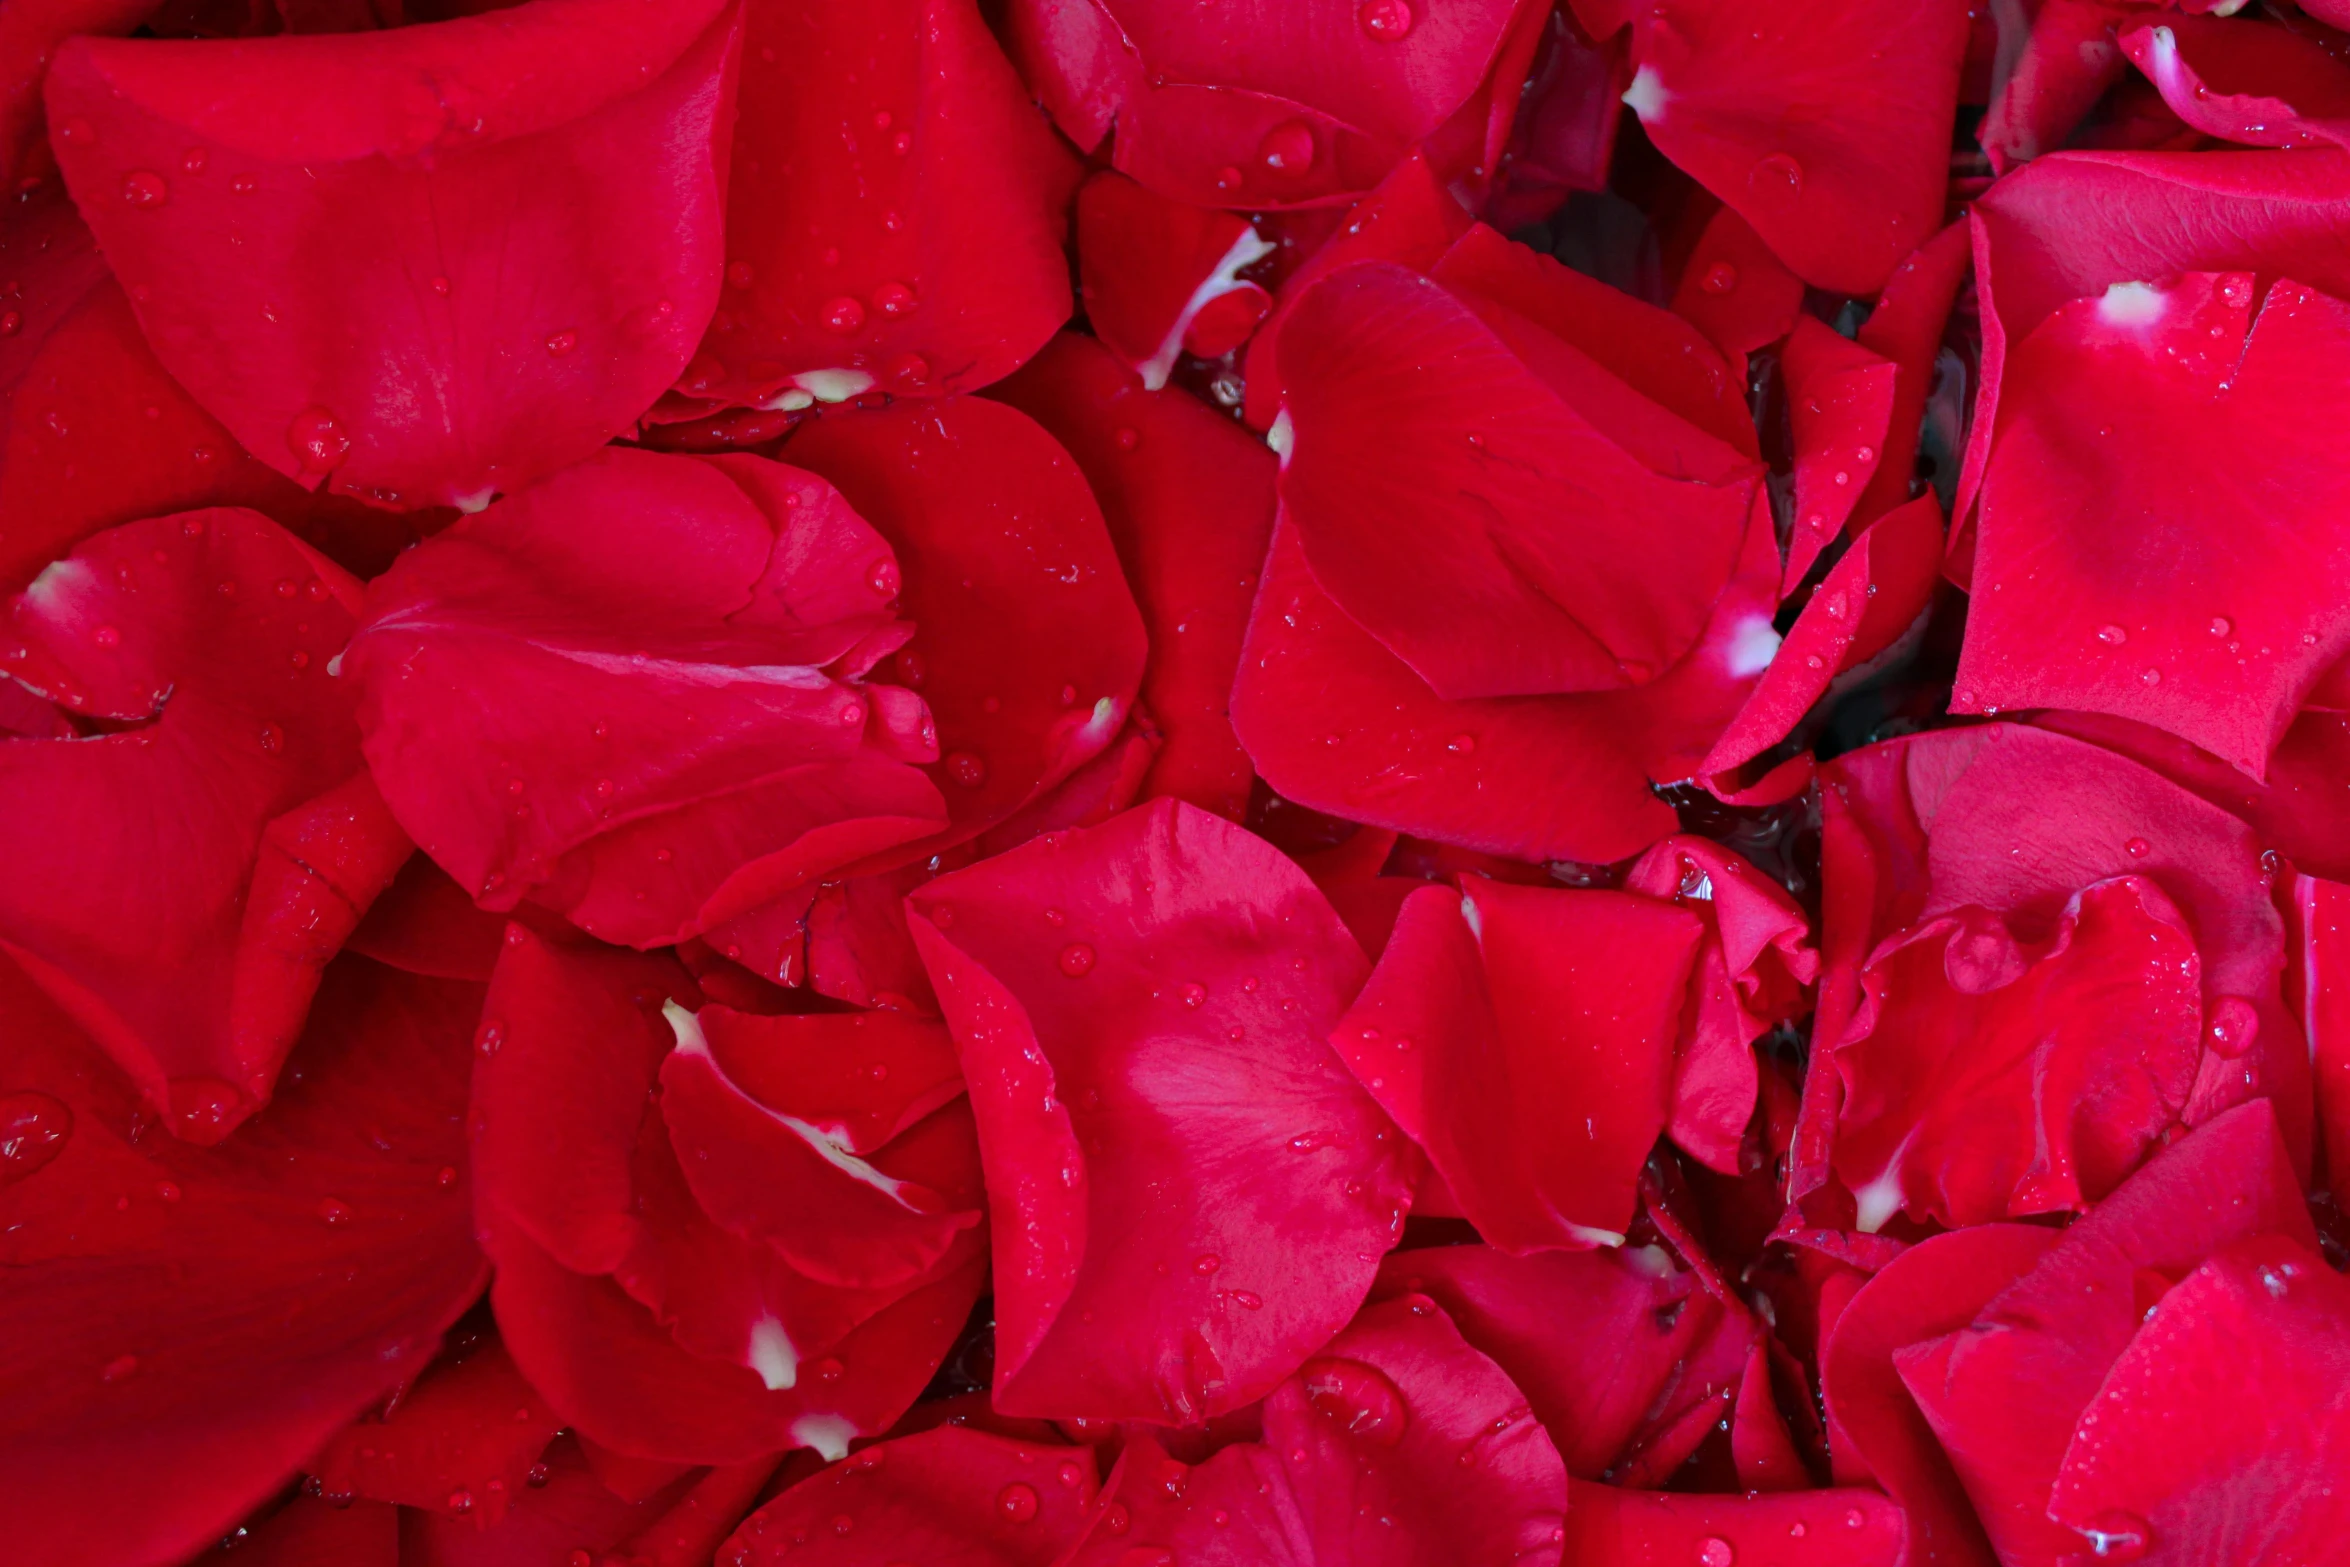 large, red petals of roses with droplets of water